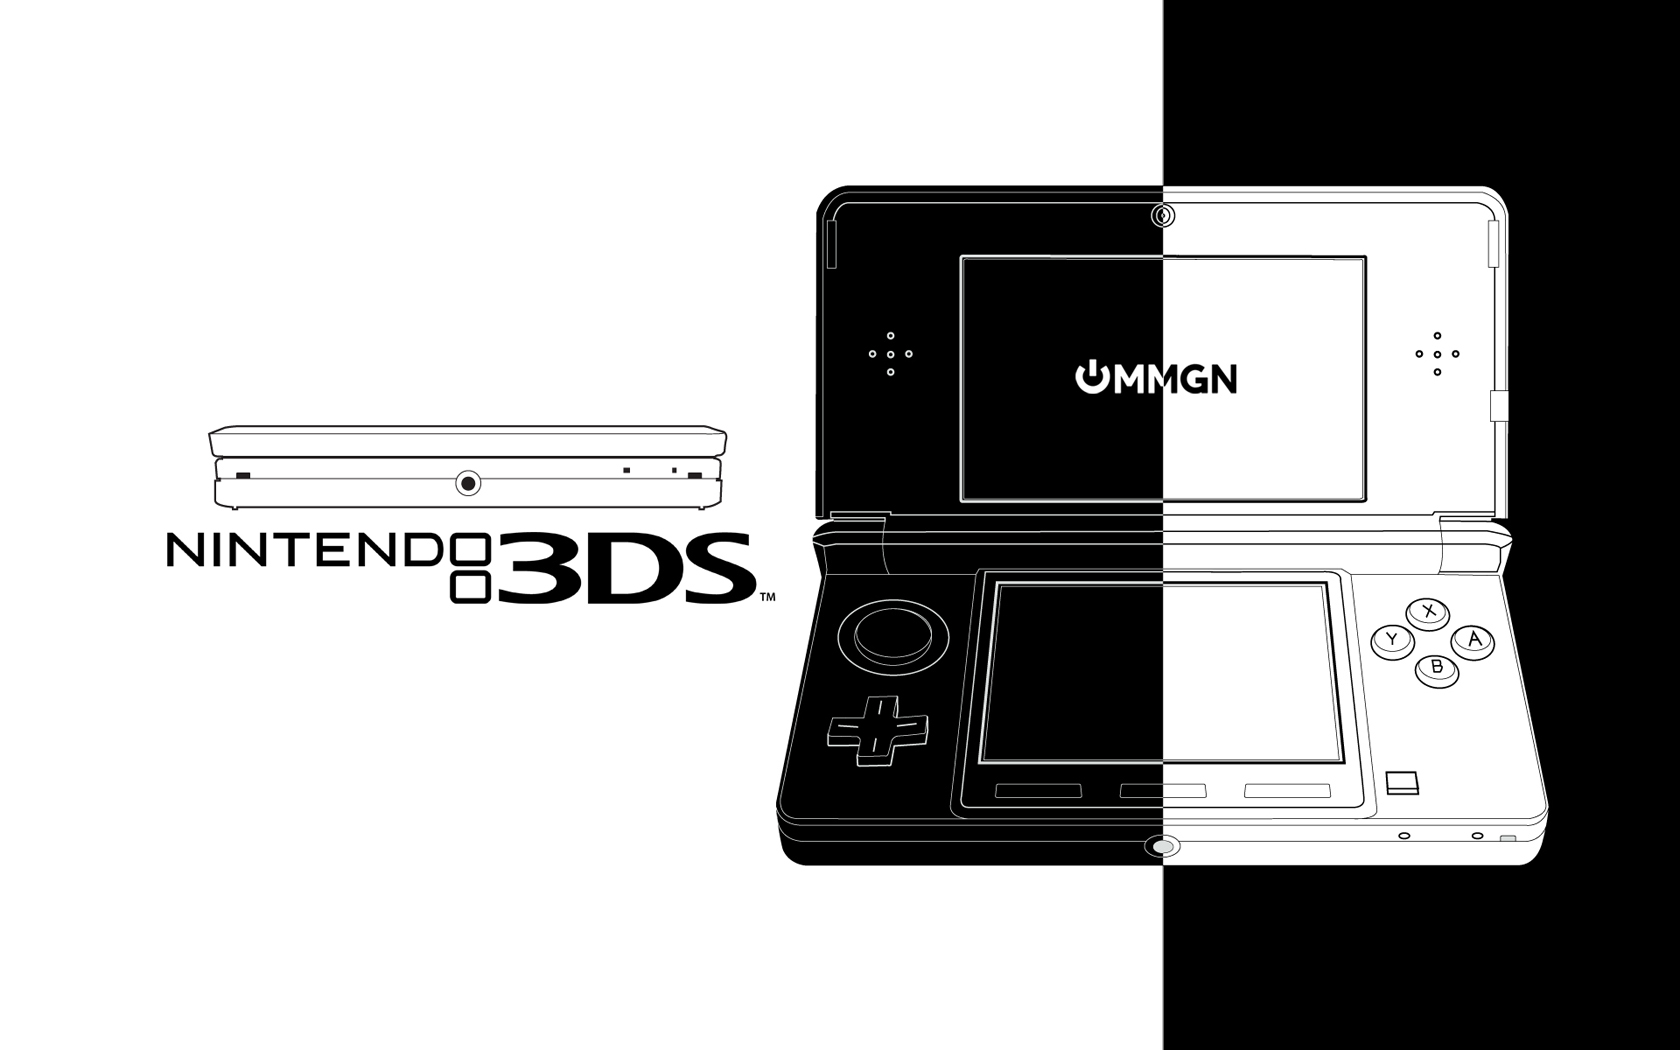 Have Found Some Cool Nintendo 3ds Wallpaper From Mmgn And All